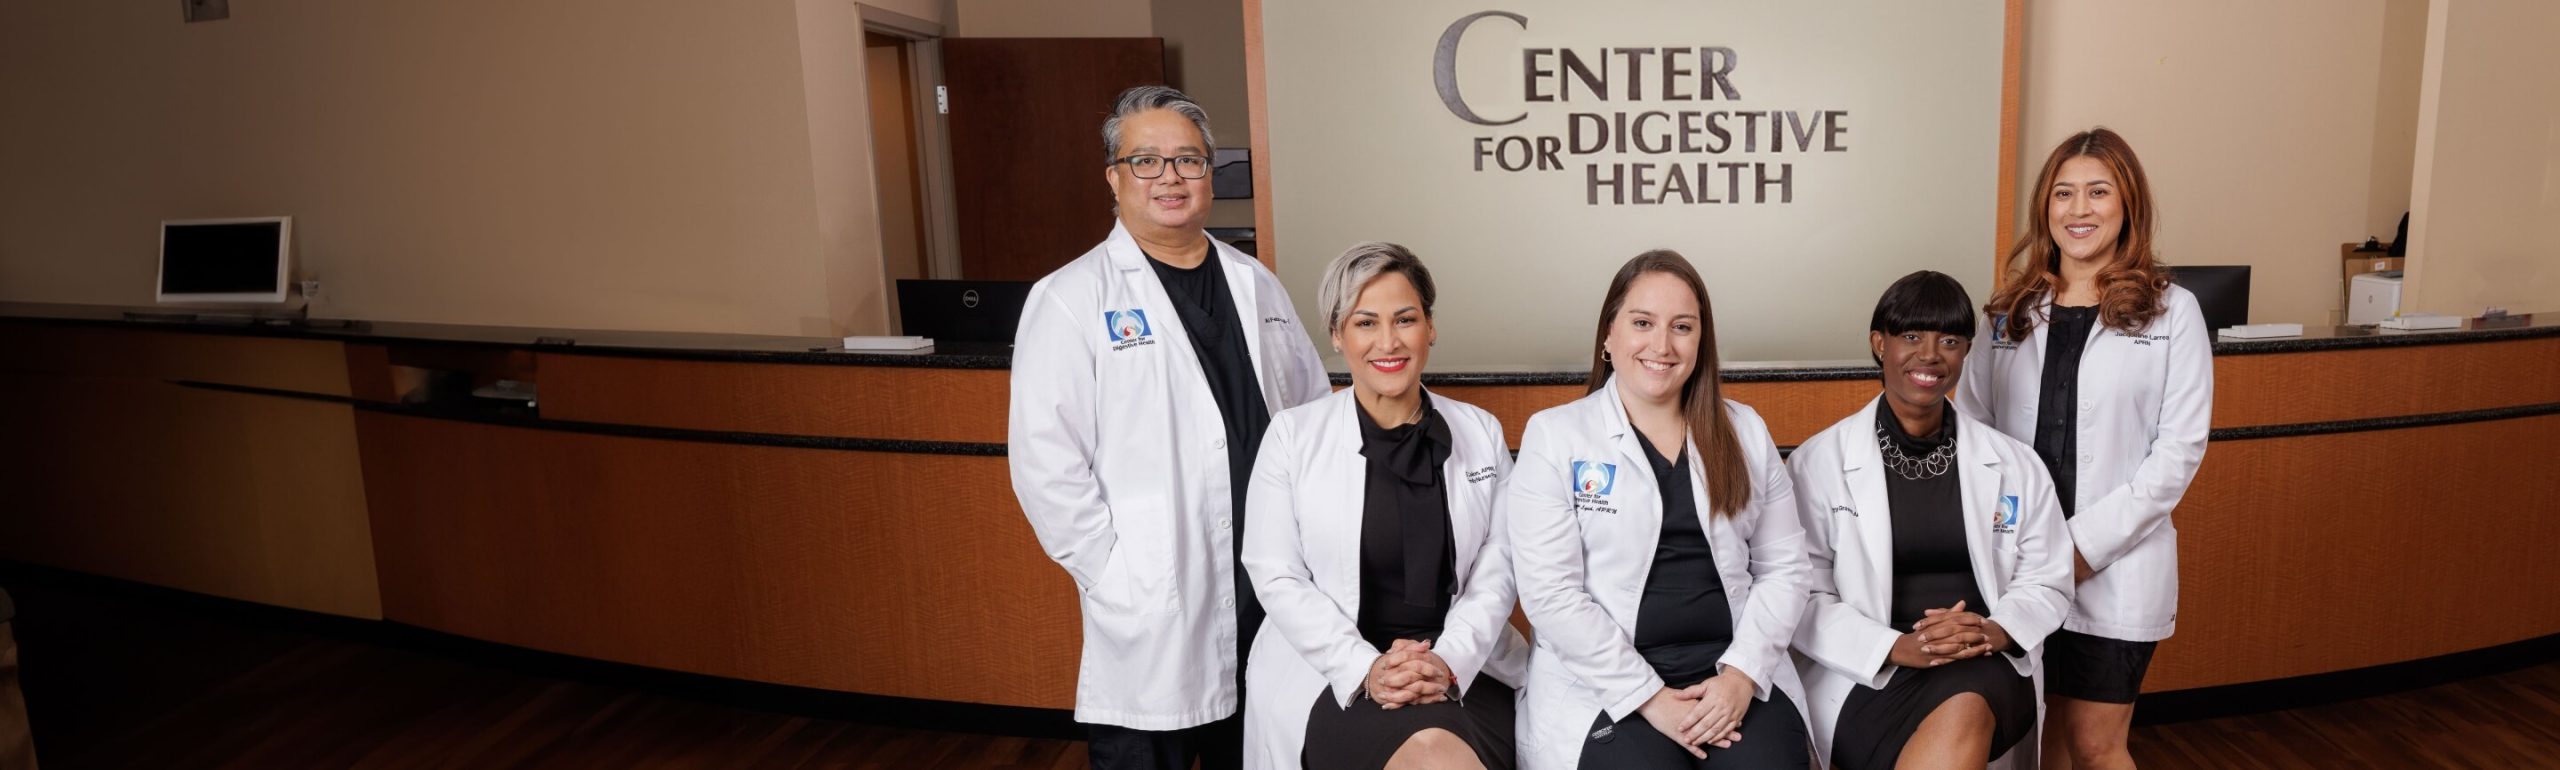 Center for Digestive Health Staff